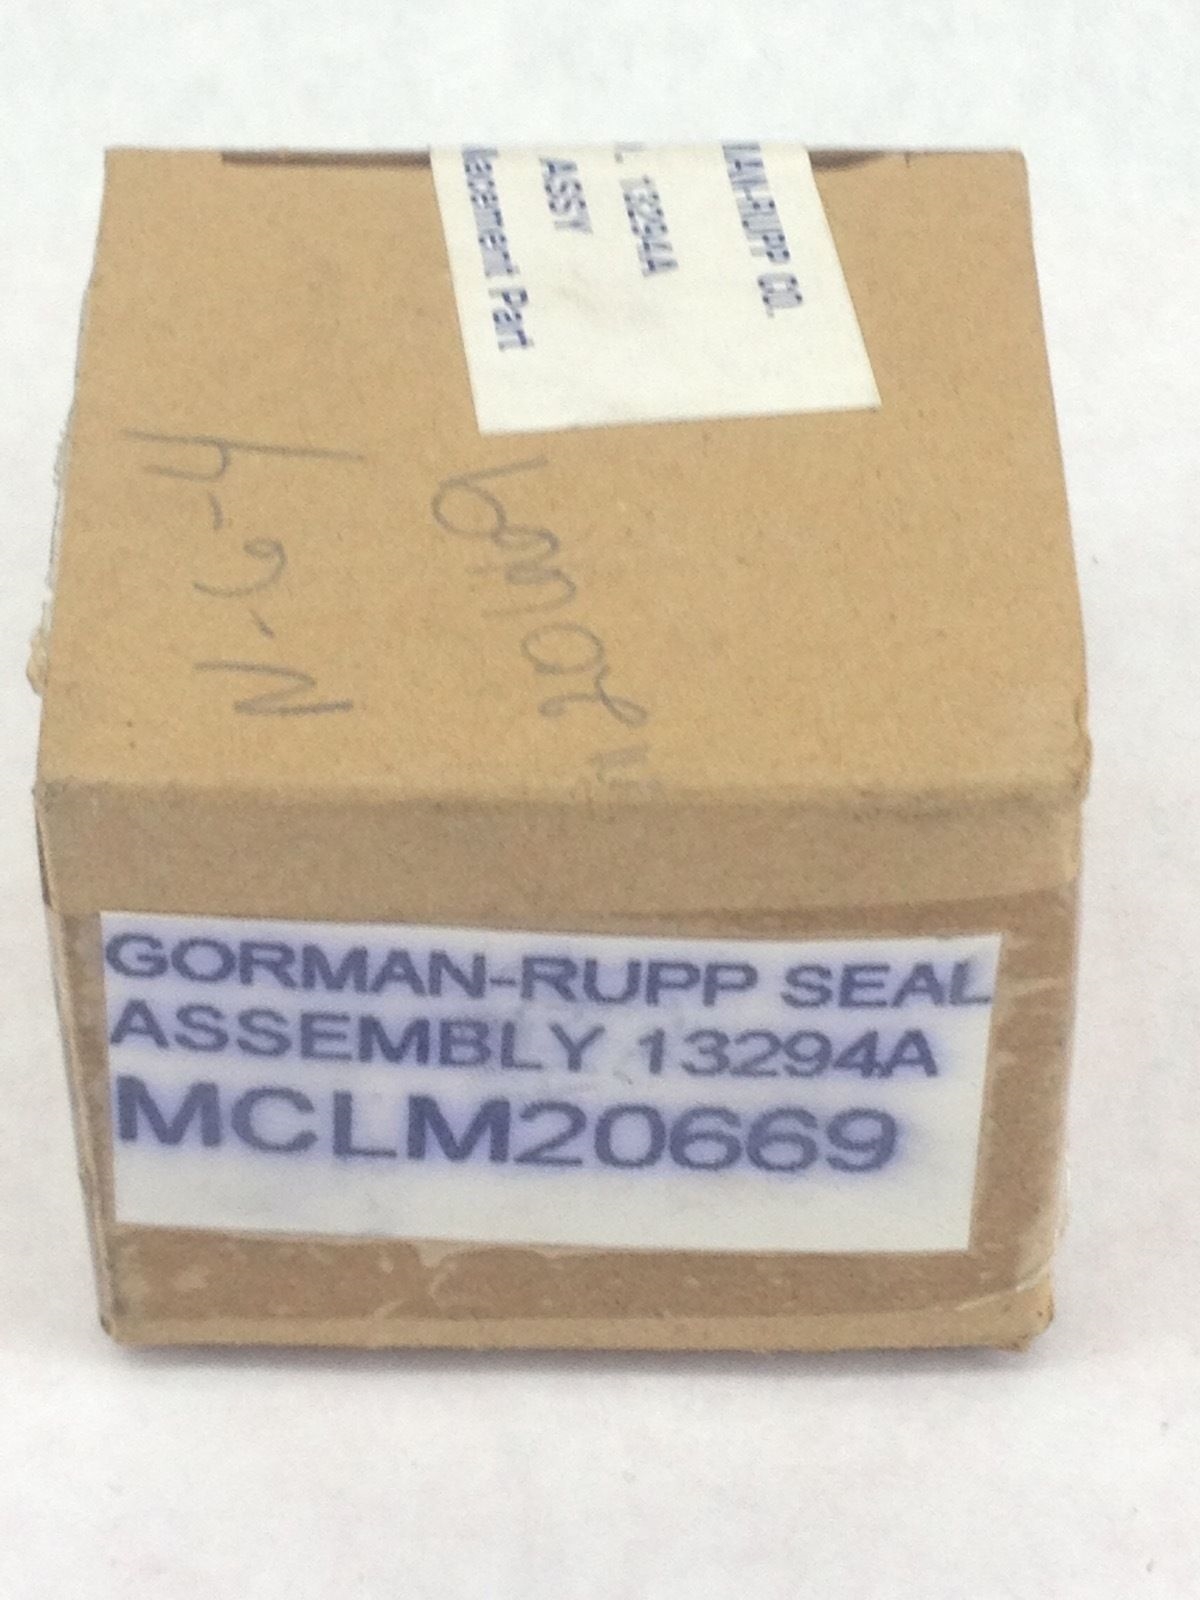 NEW FACTORY SEALED! GENUINE GORMAN-RUPP 13294A SEAL ASSEMBLY FAST SHIP!!! (A103) 2